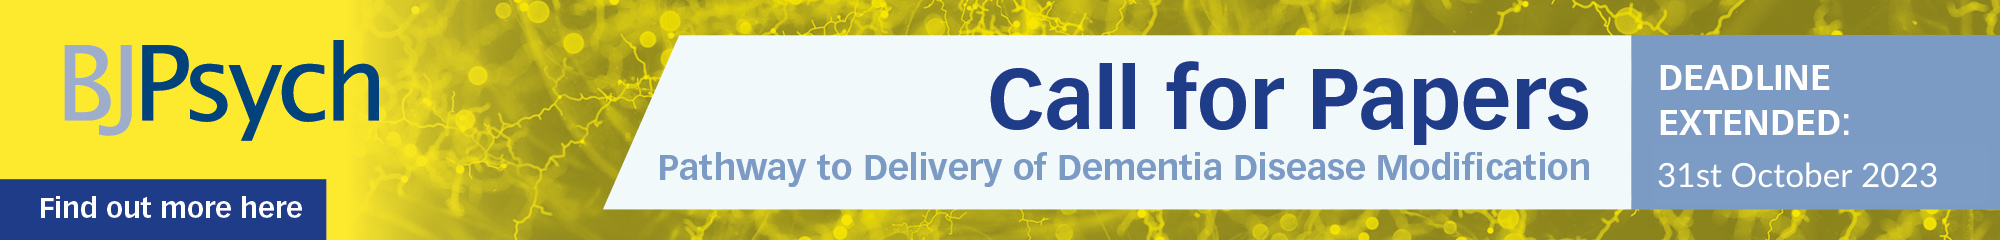 Click to explore the BJPsych 2024 Themed Issue Call for Papers on Pathways to Delivery of Dementia Disease Modifcation